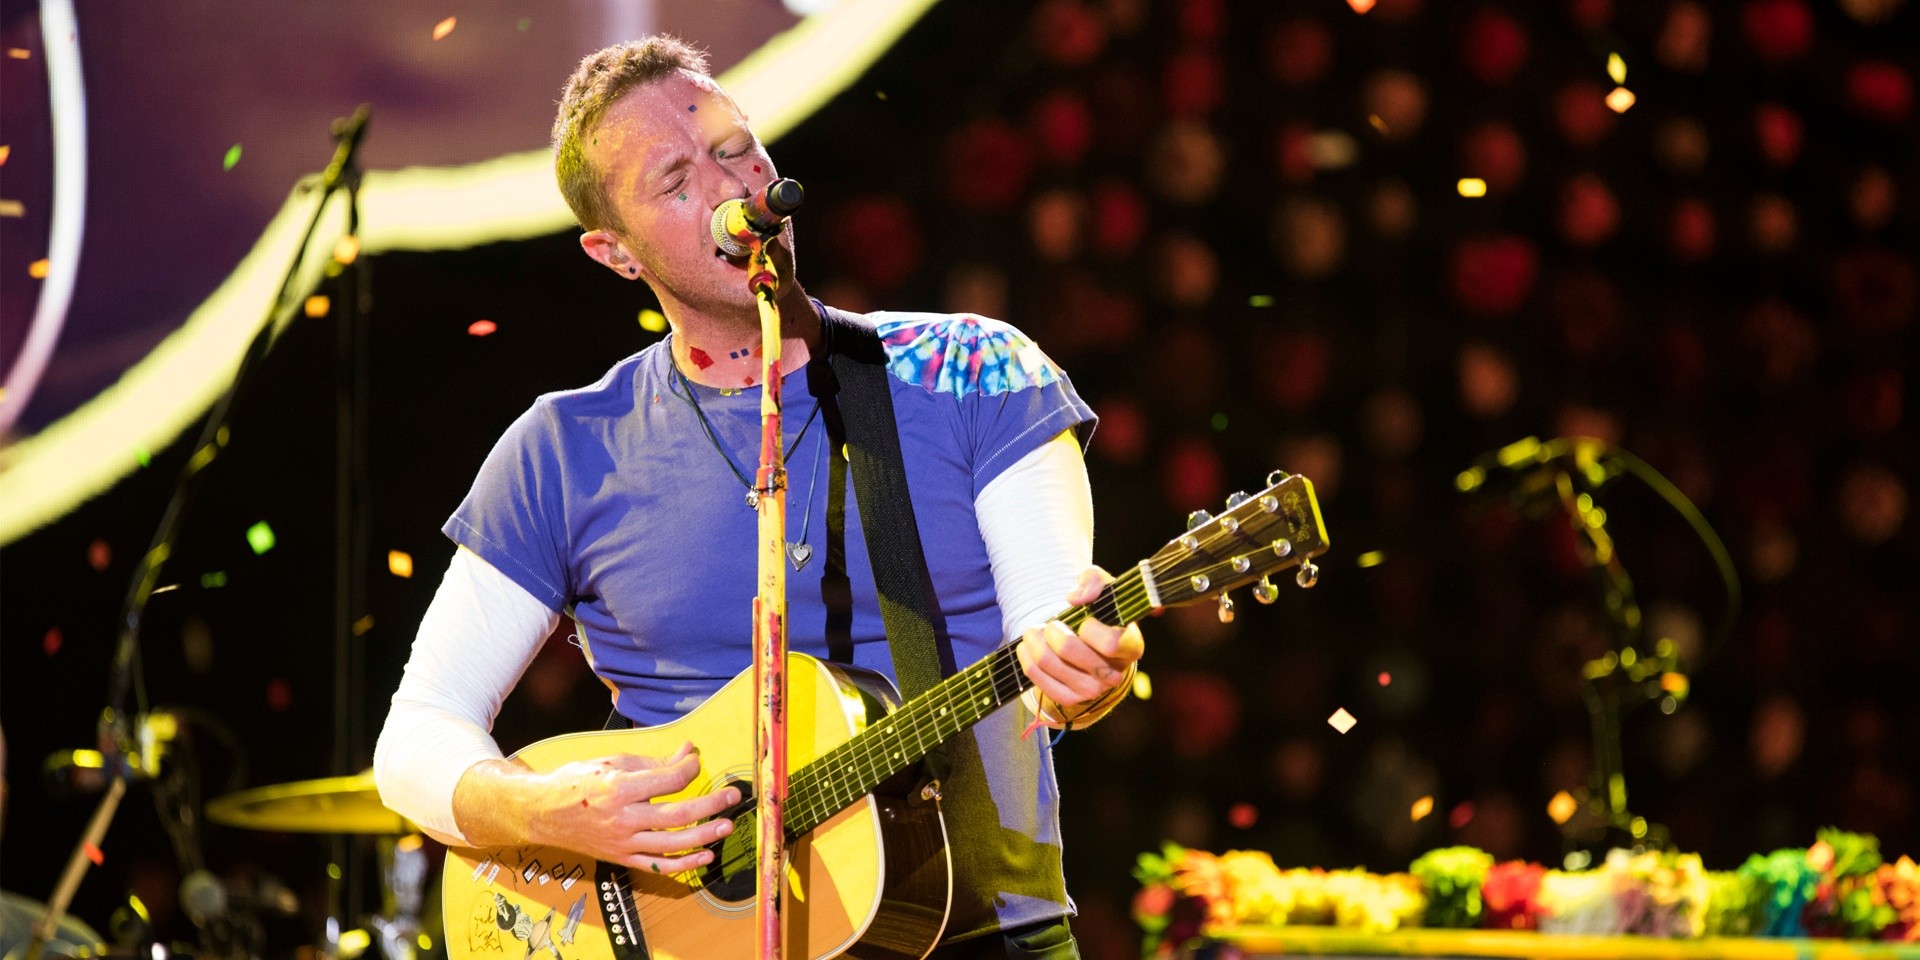 WATCH: Coldplay performs a song written about Singapore